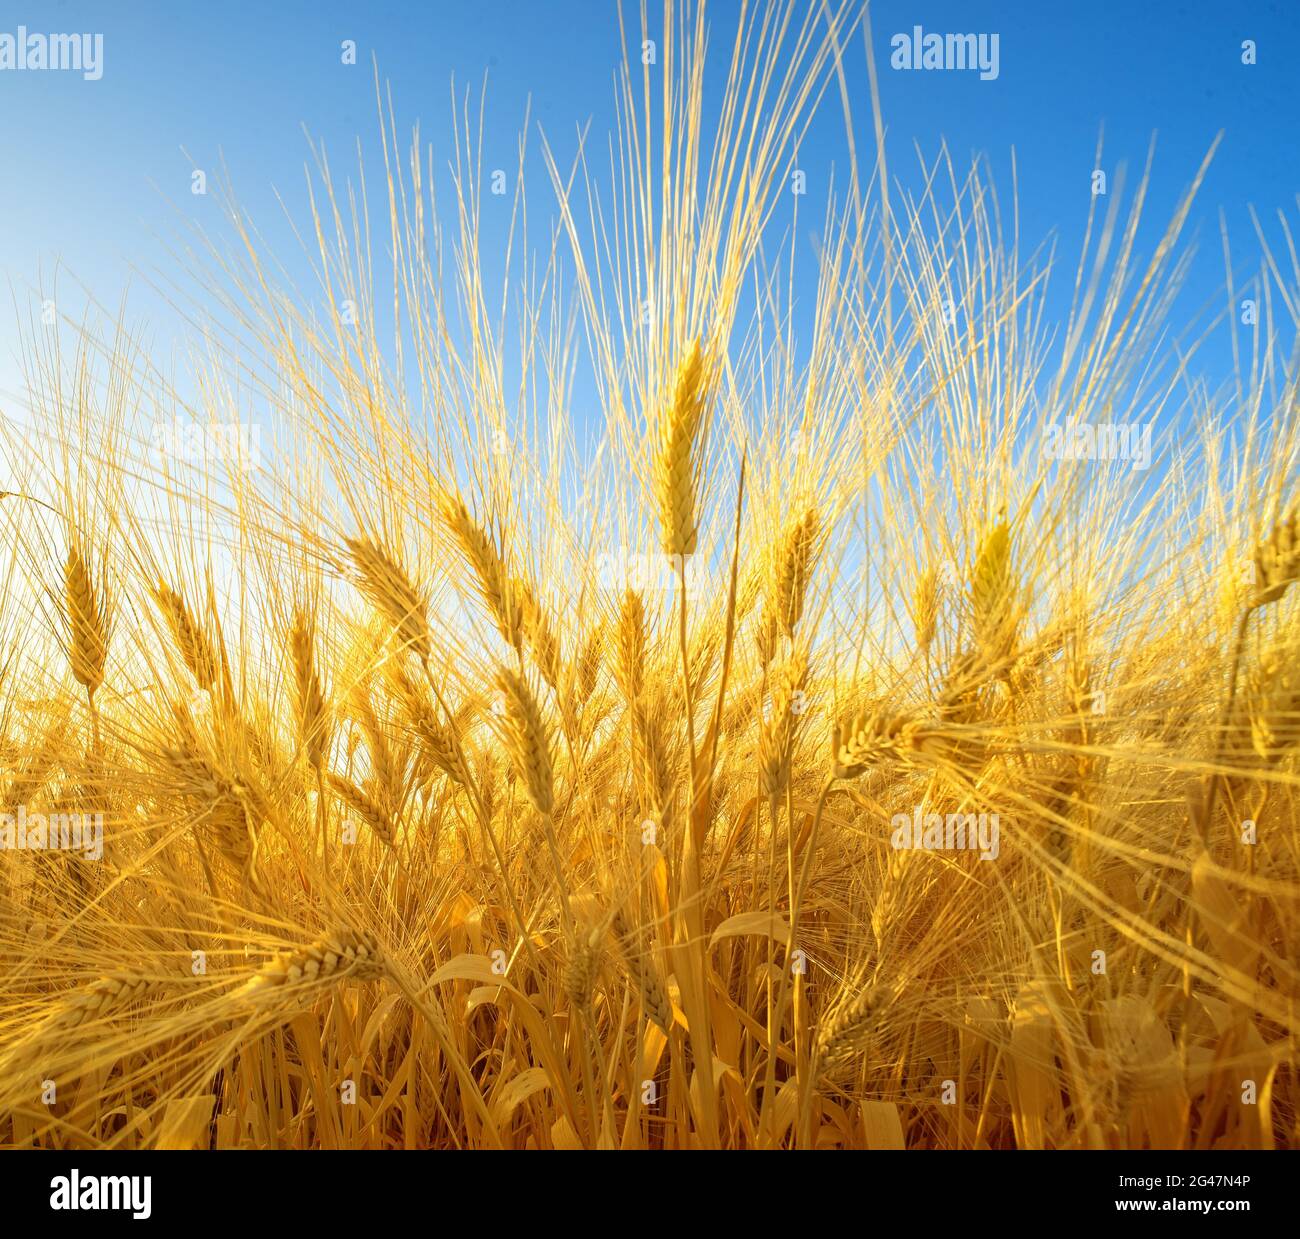 Dramatic closeup on wheat field with ripe golden spikes, wide angle perspective Stock Photo